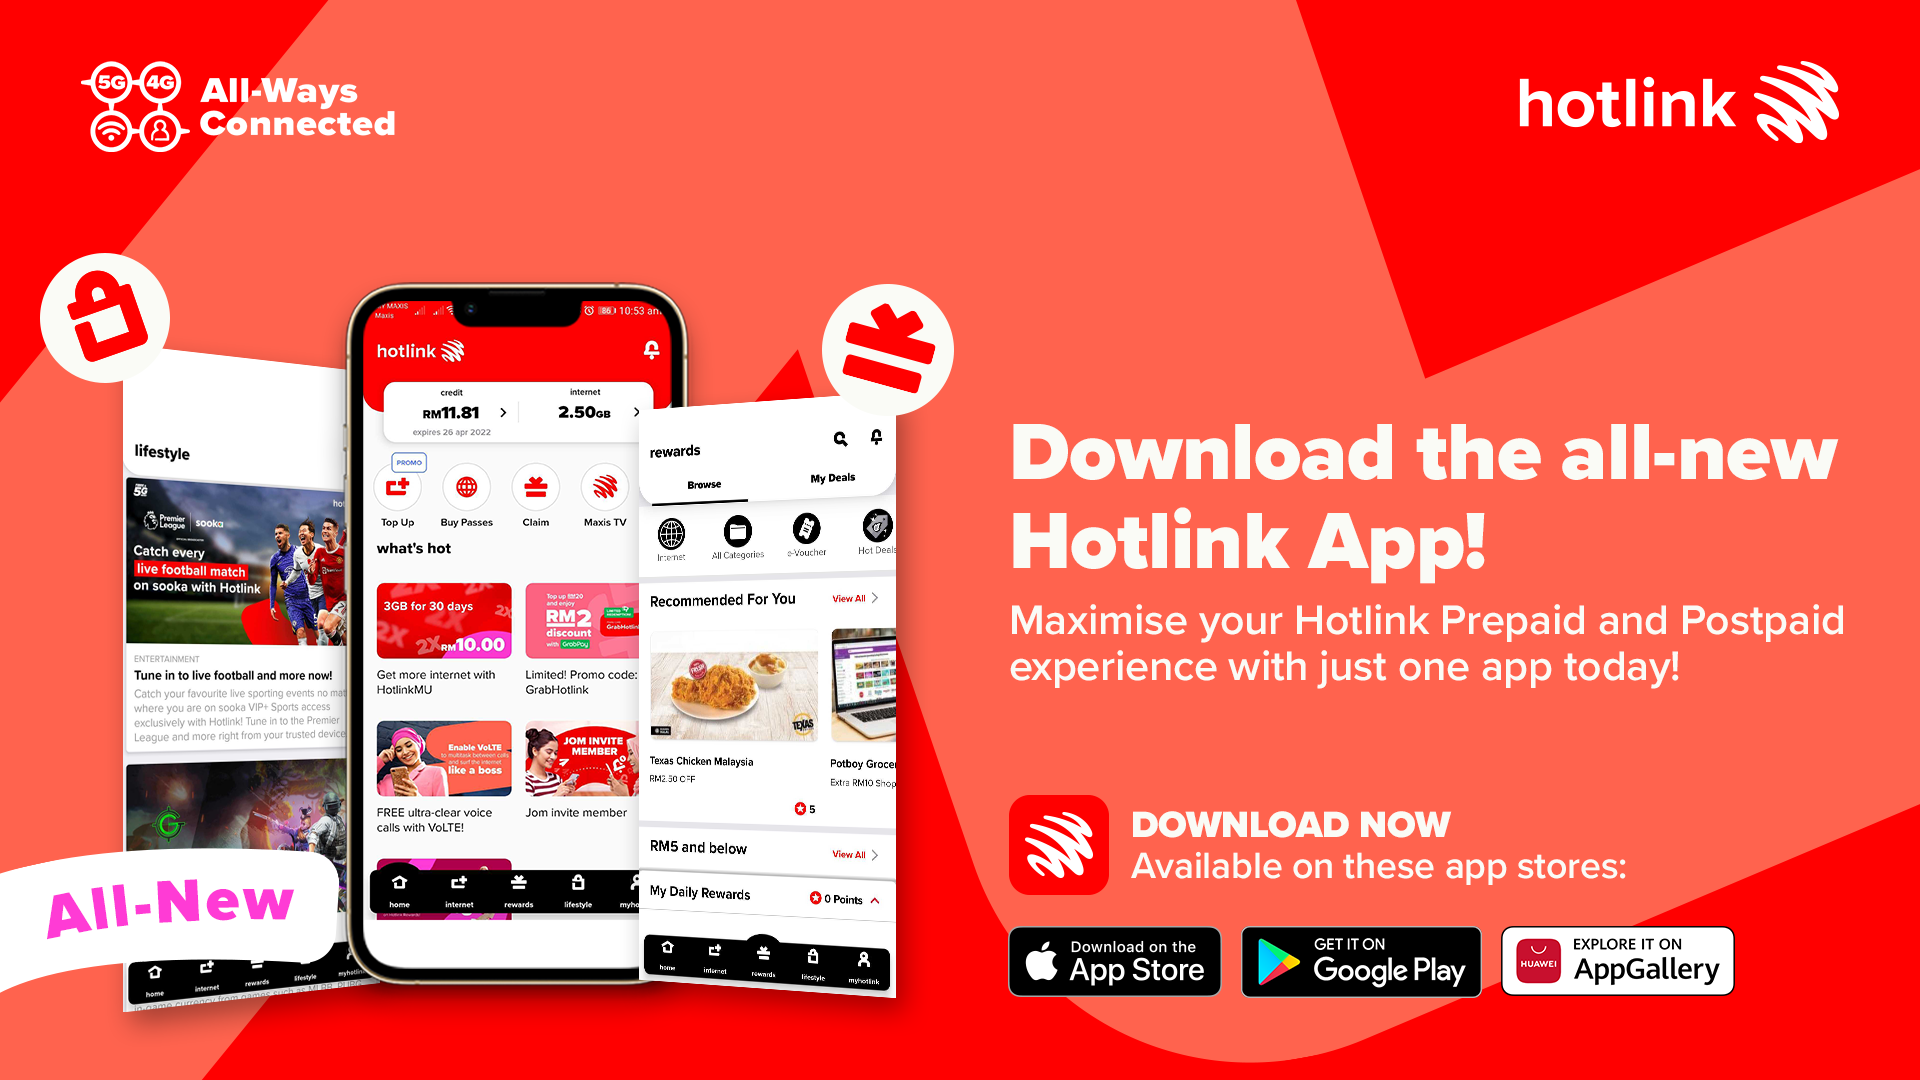 Get rewarded this Raya with the new all-in-one Hotlink App